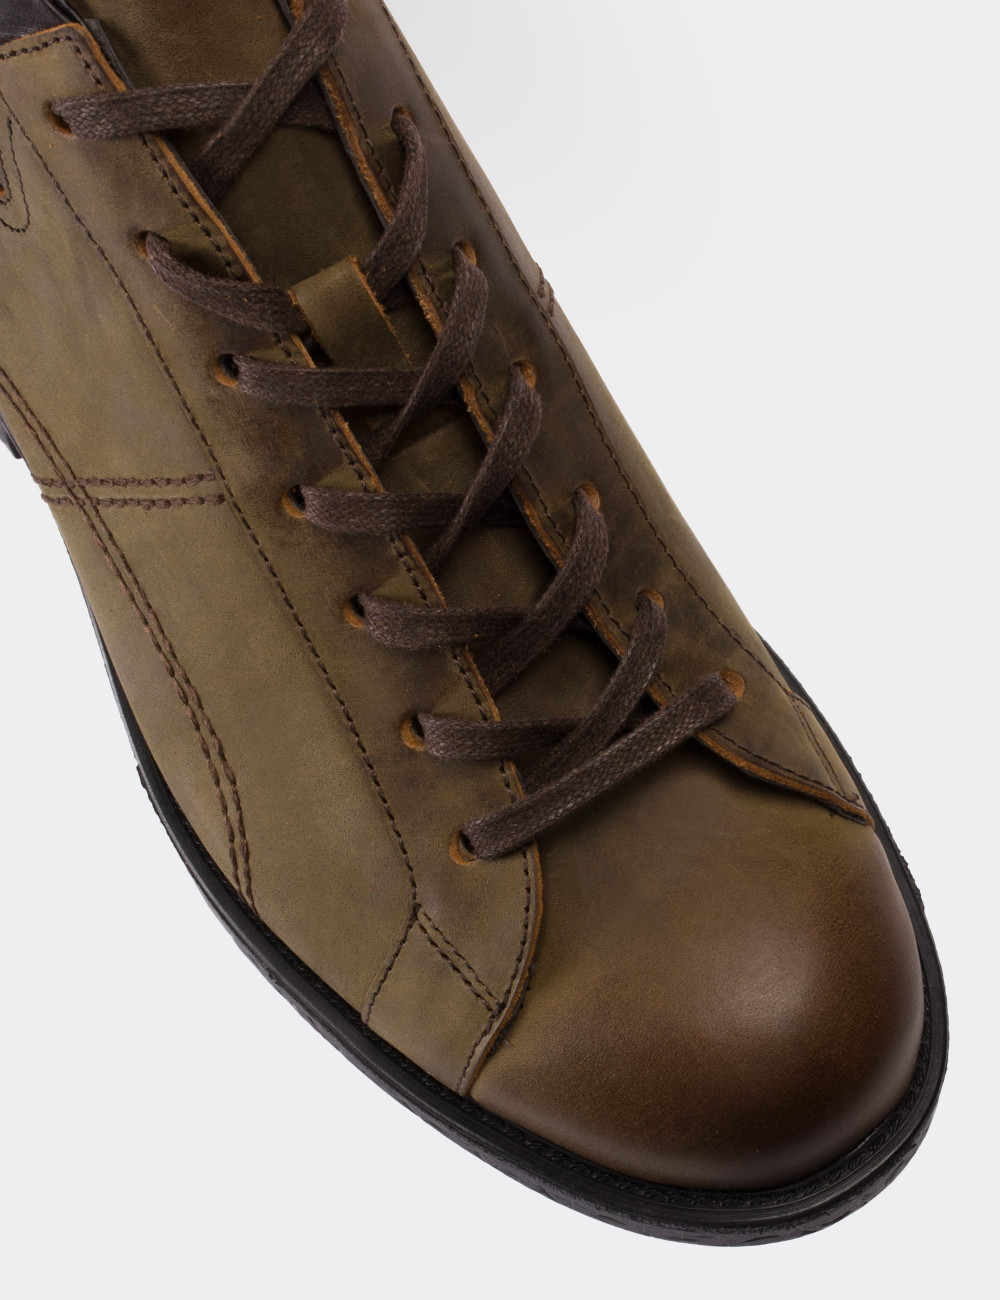 Green  Leather Boots - 01760MYSLC01